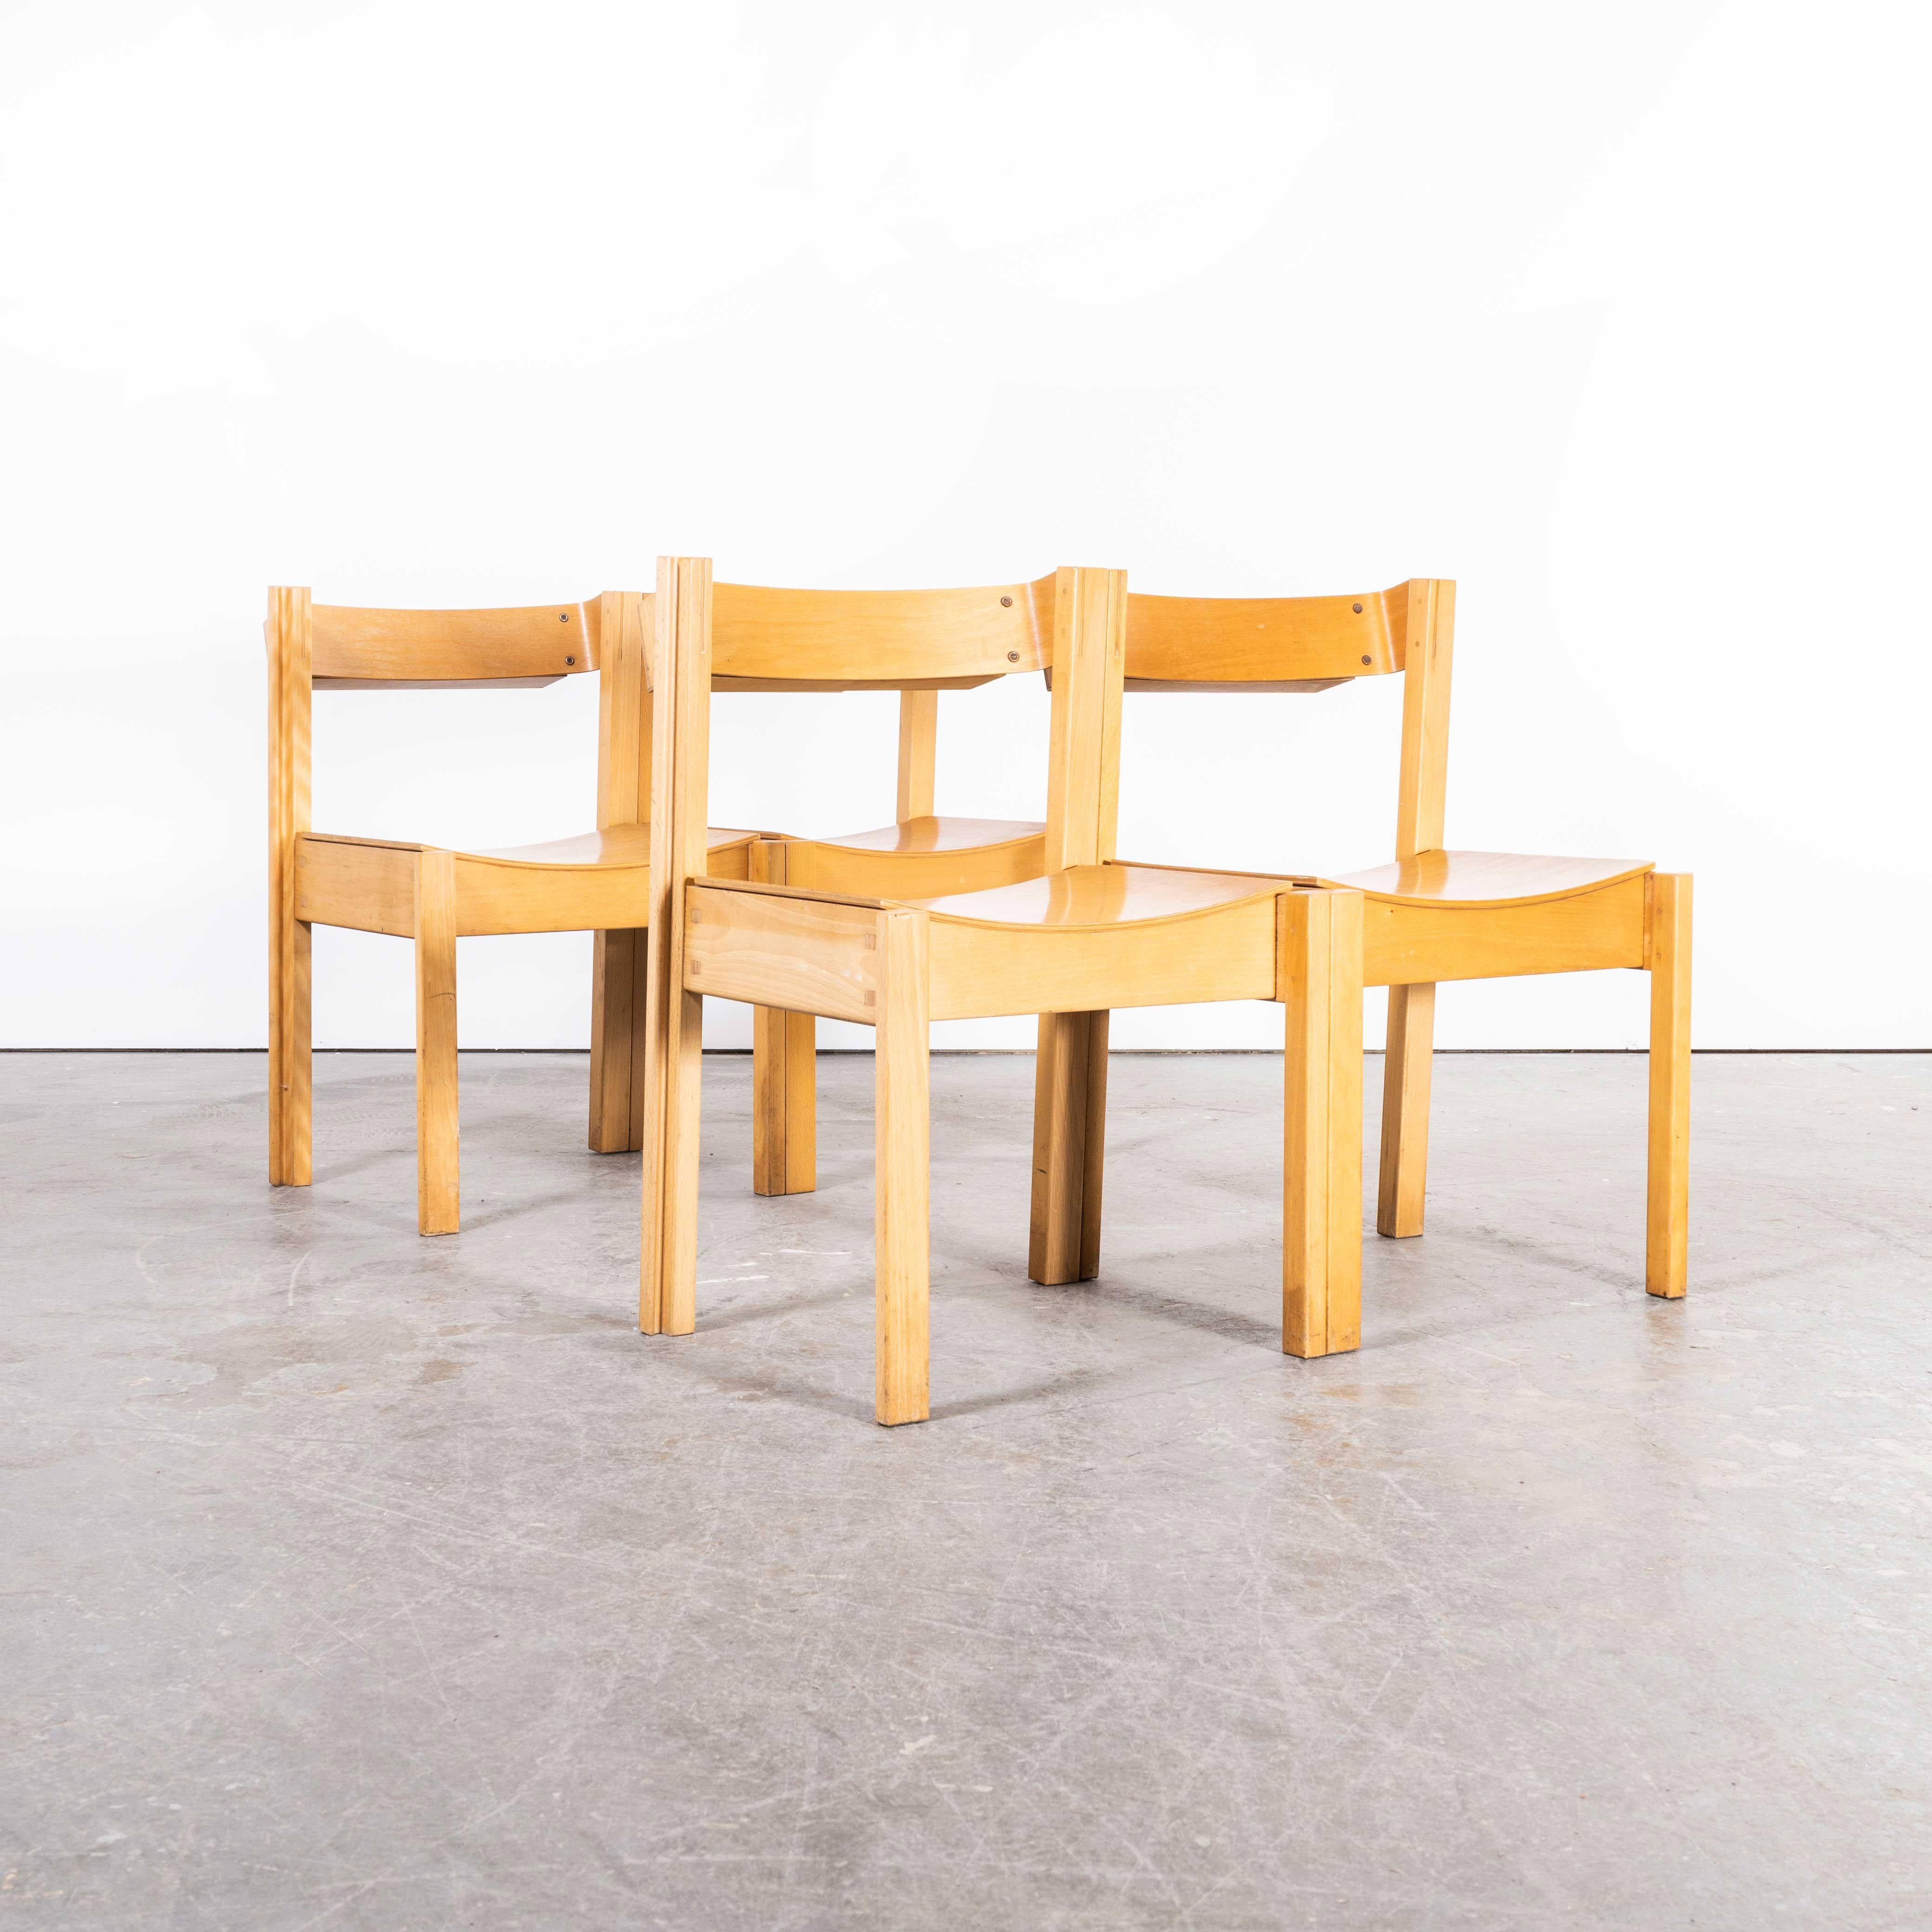 1960’s linking and stacking chairs by Clive Bacon – set of four
1960’s linking and stacking chairs by Clive Bacon – set of four. Bacon’s ingenious jigsaw leg design enables the chairs to be connected together to form solid rows and also allows the